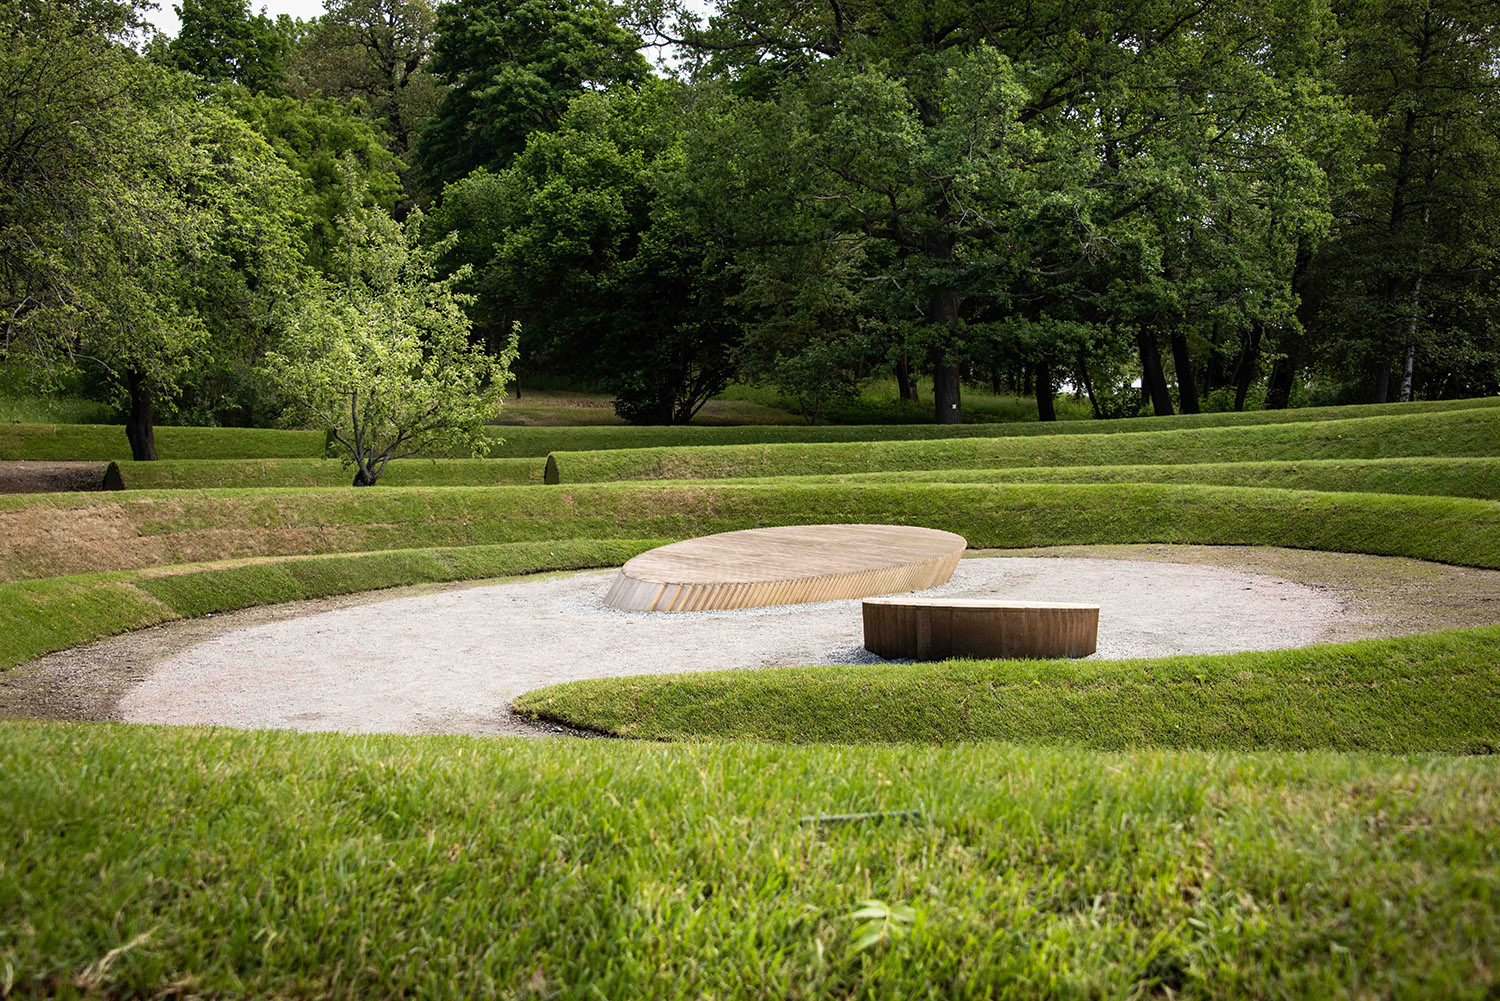 Circles in the center of the memorial.